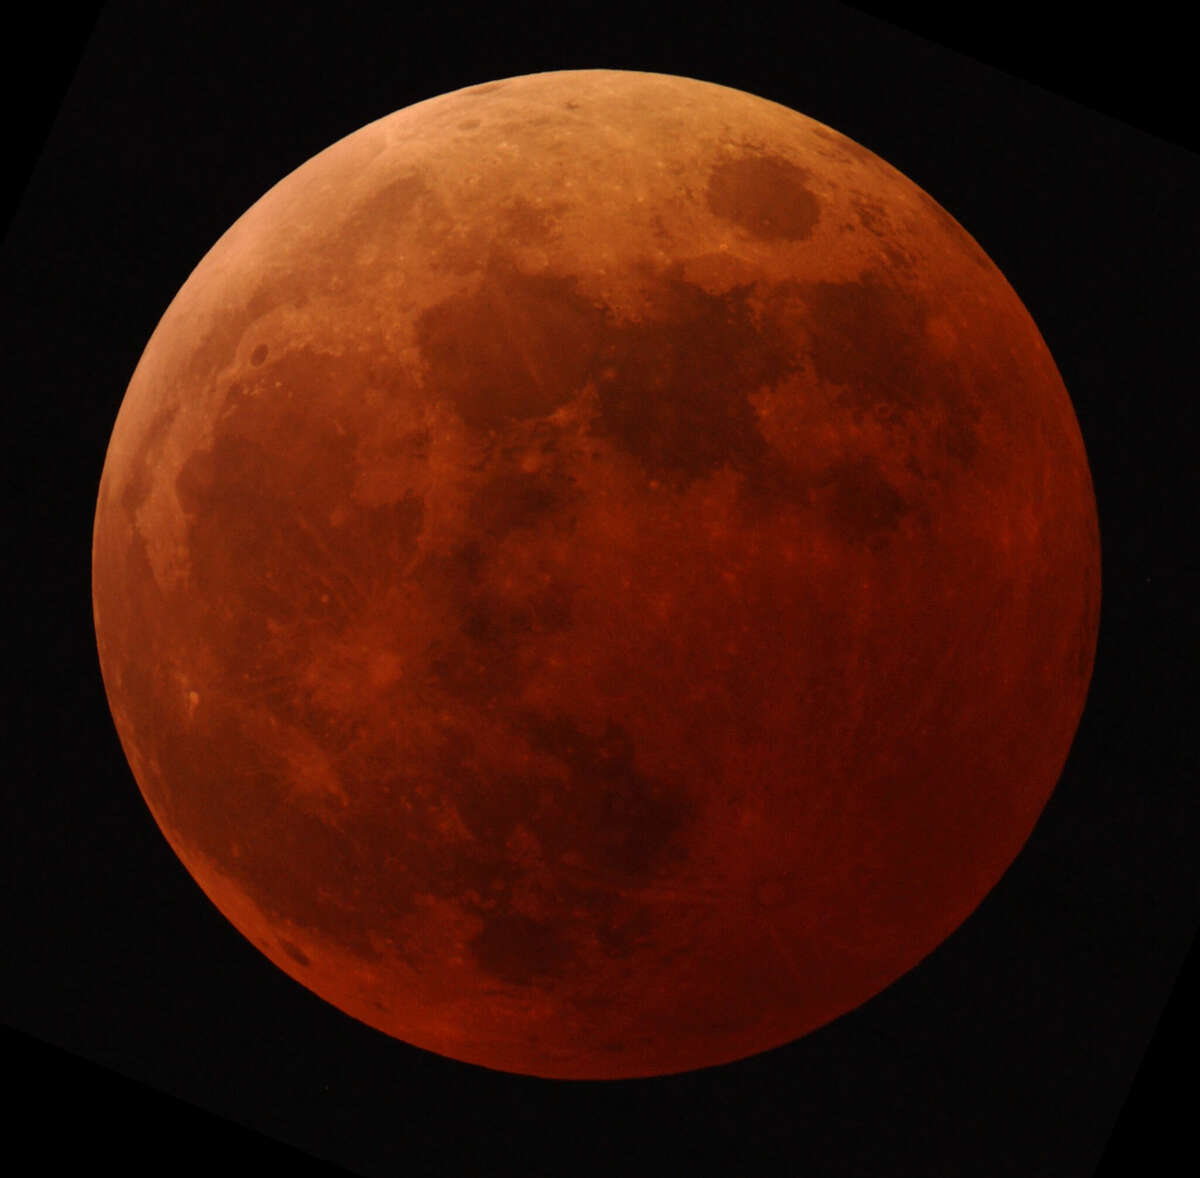 On May 15, a total lunar eclipse will be visible from North and South America, Europe, Africa, and parts of Asia, and it will begin early enough that many people should be able to catch a glimpse before they go to bed.